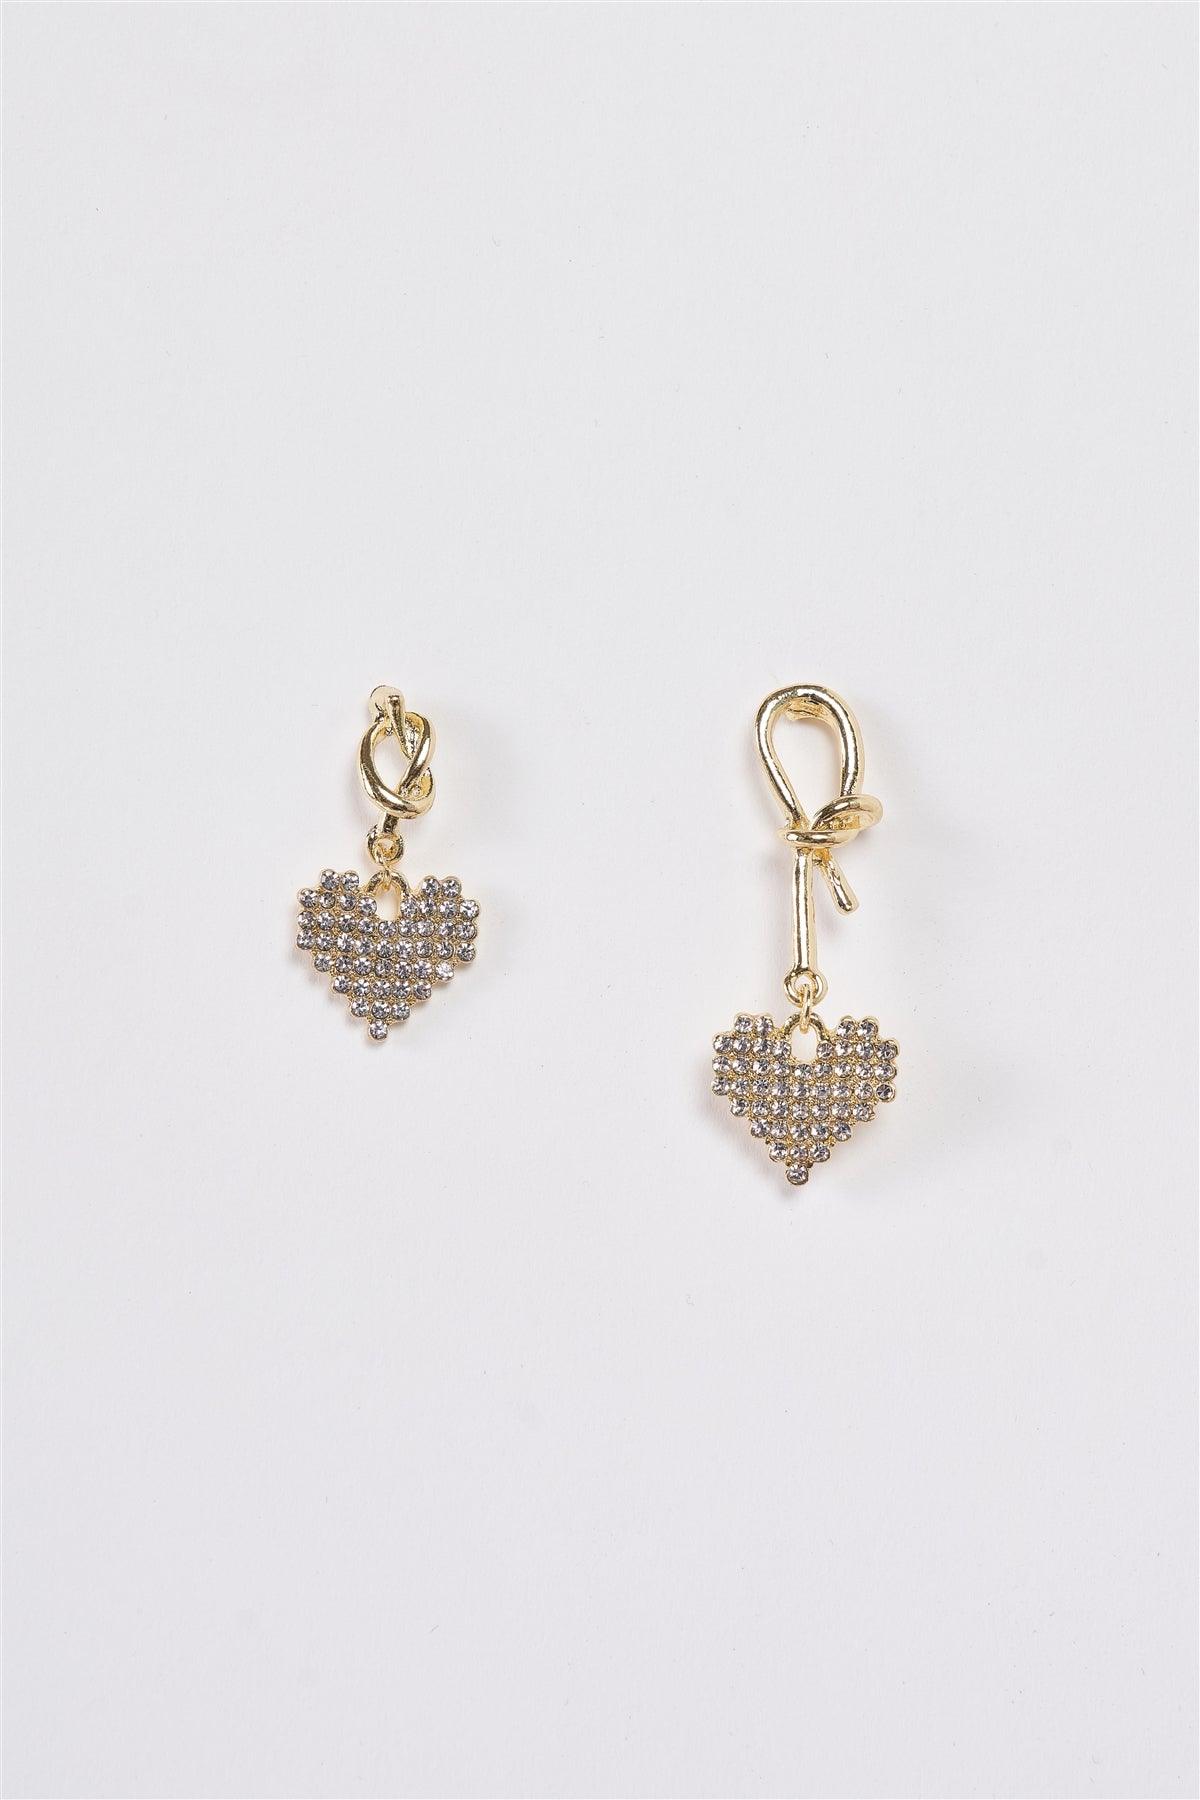 Tied By Your Love Asymmetrical Gold Rhinestone Incrusted Heart Shaped Dangle Earrings /3 Pairs